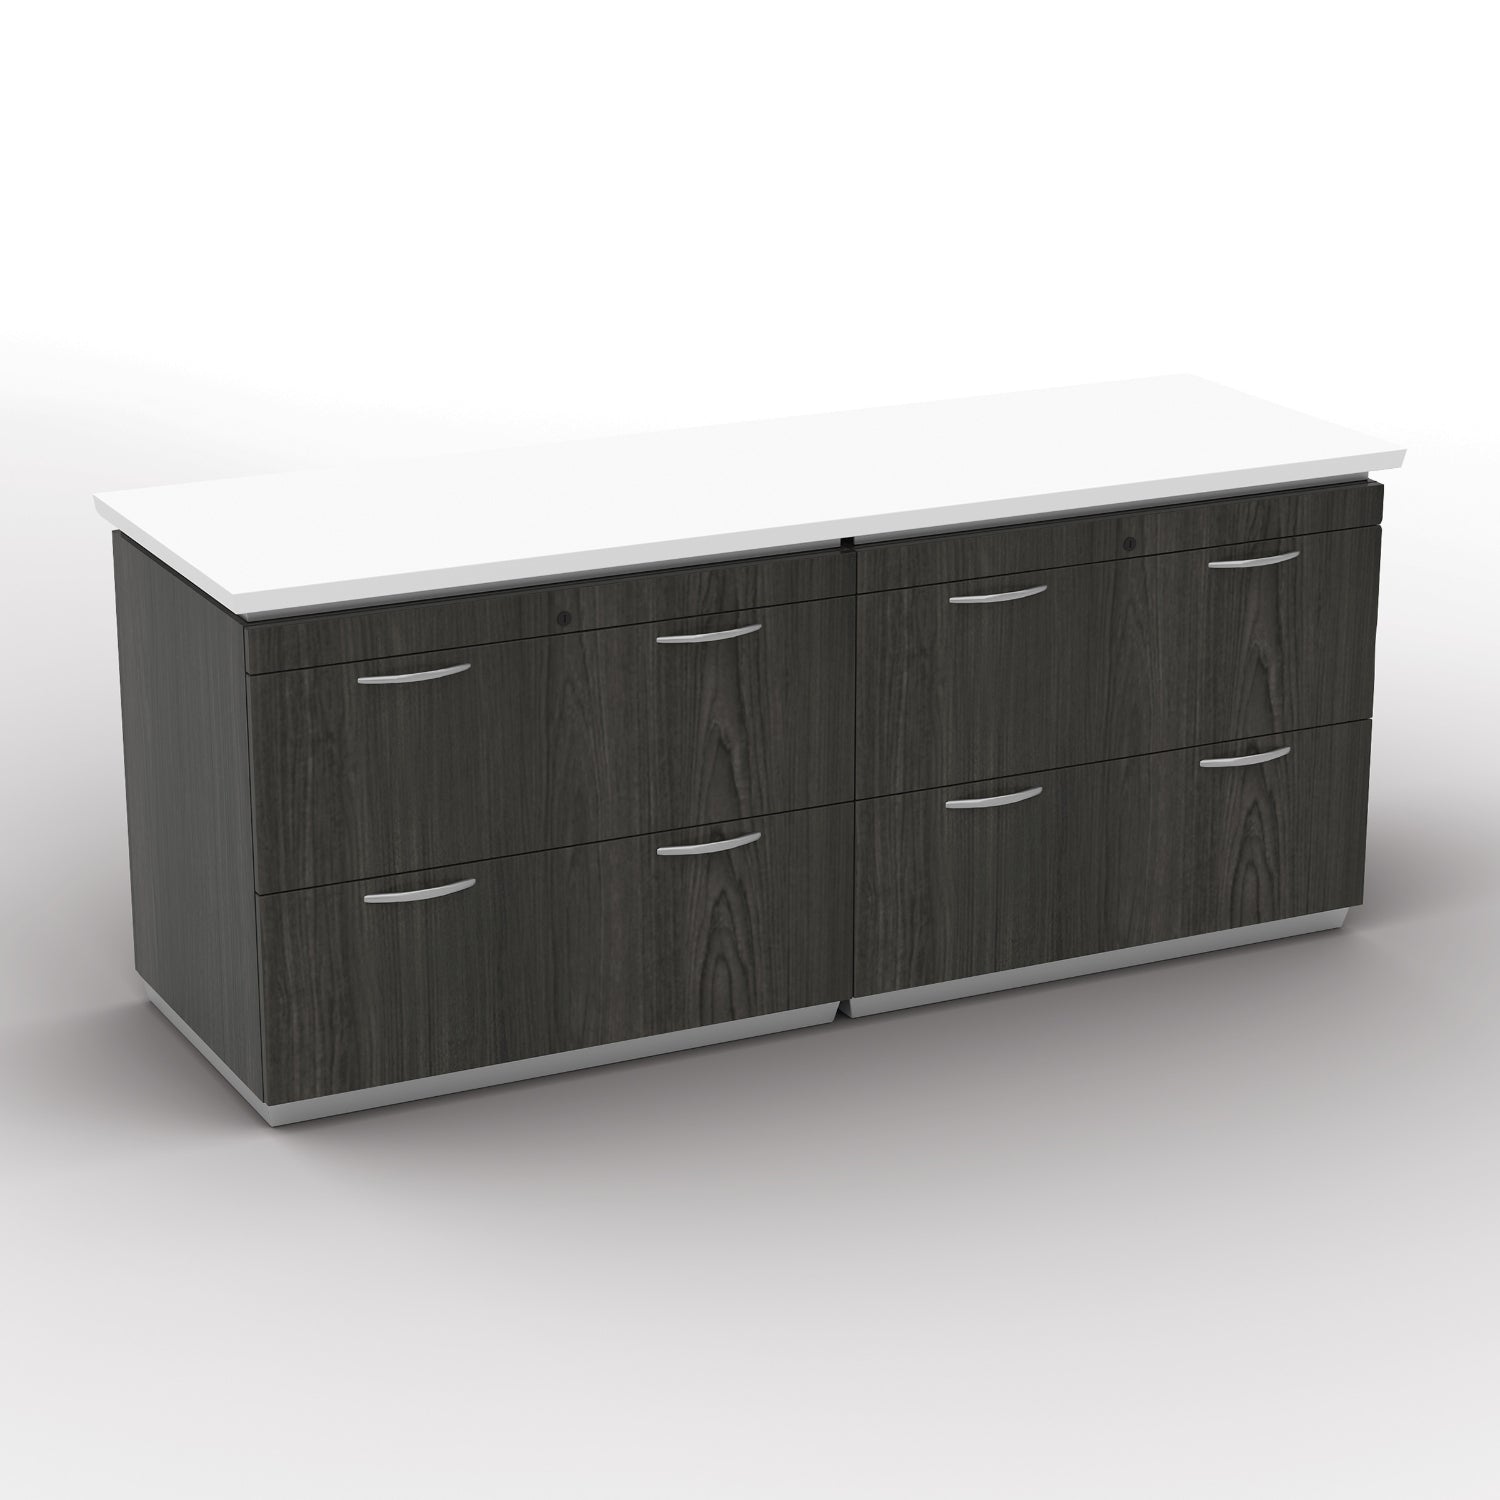 "Tuxedo White" Double Lateral File Credenza, 72" x 24", White Top with Slate Grey Base